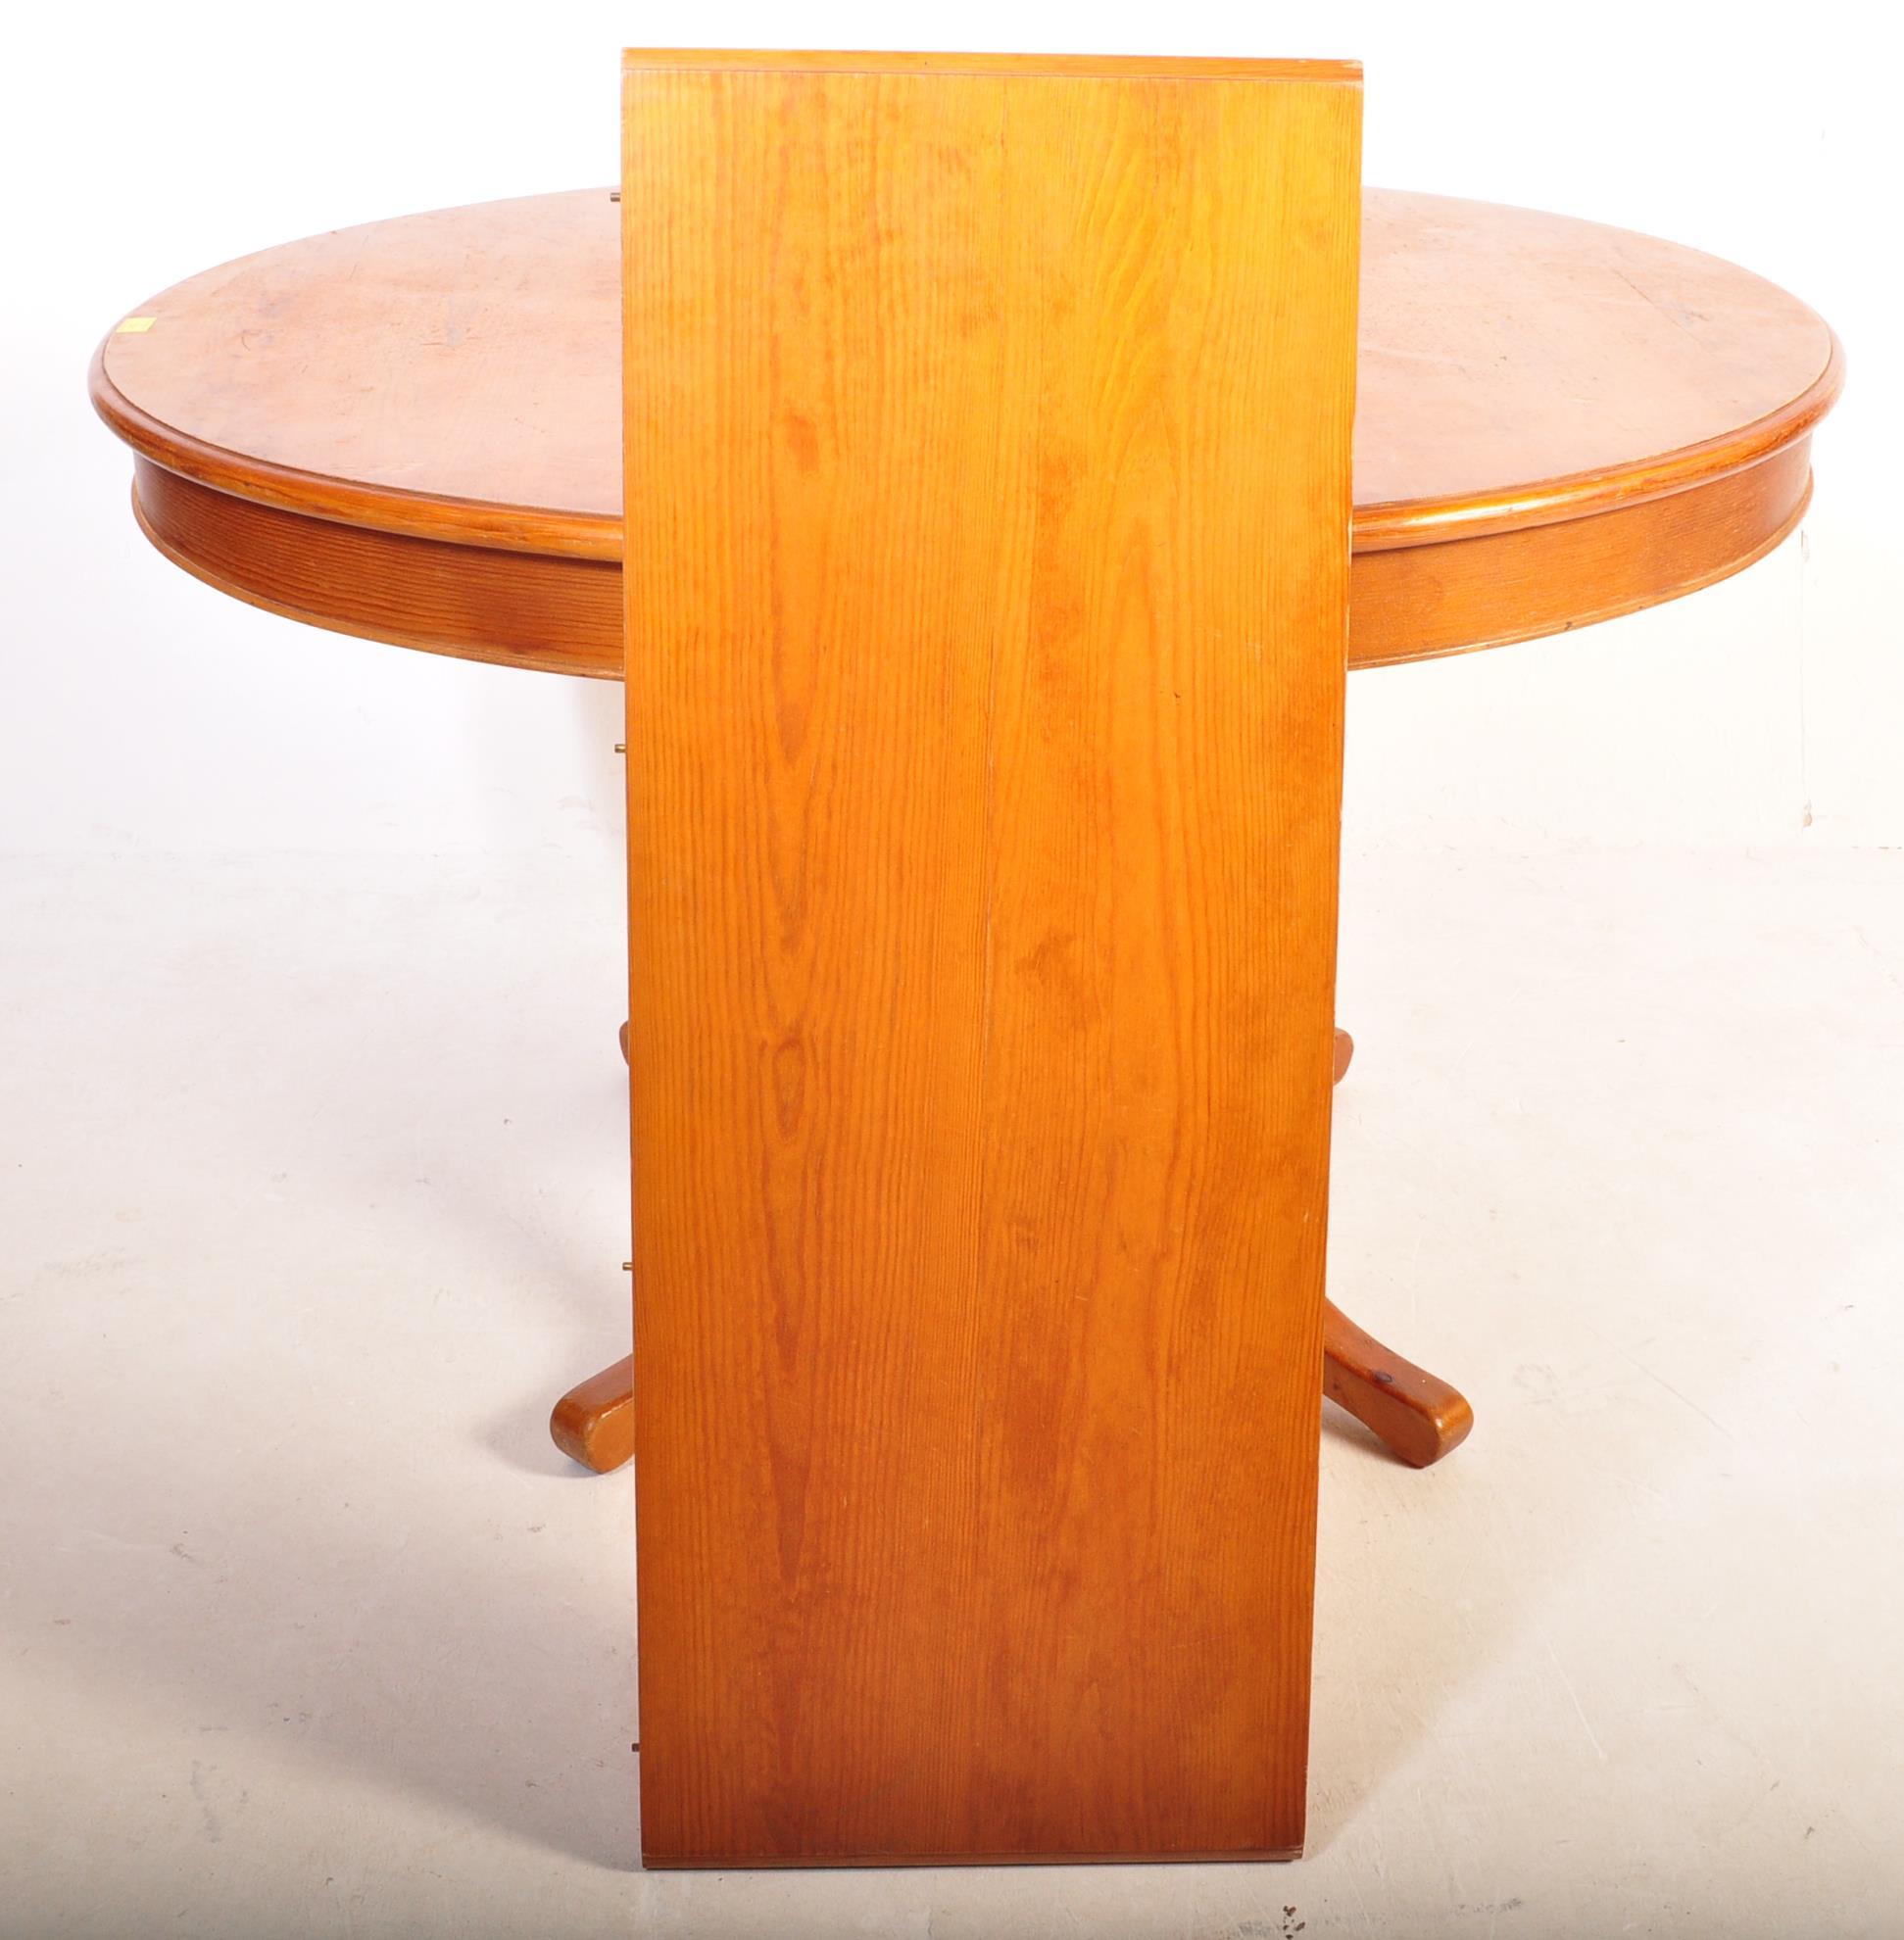 20TH CENTURY COUNTRY PINE EXTENDABLE DINING TABLE - Image 6 of 8